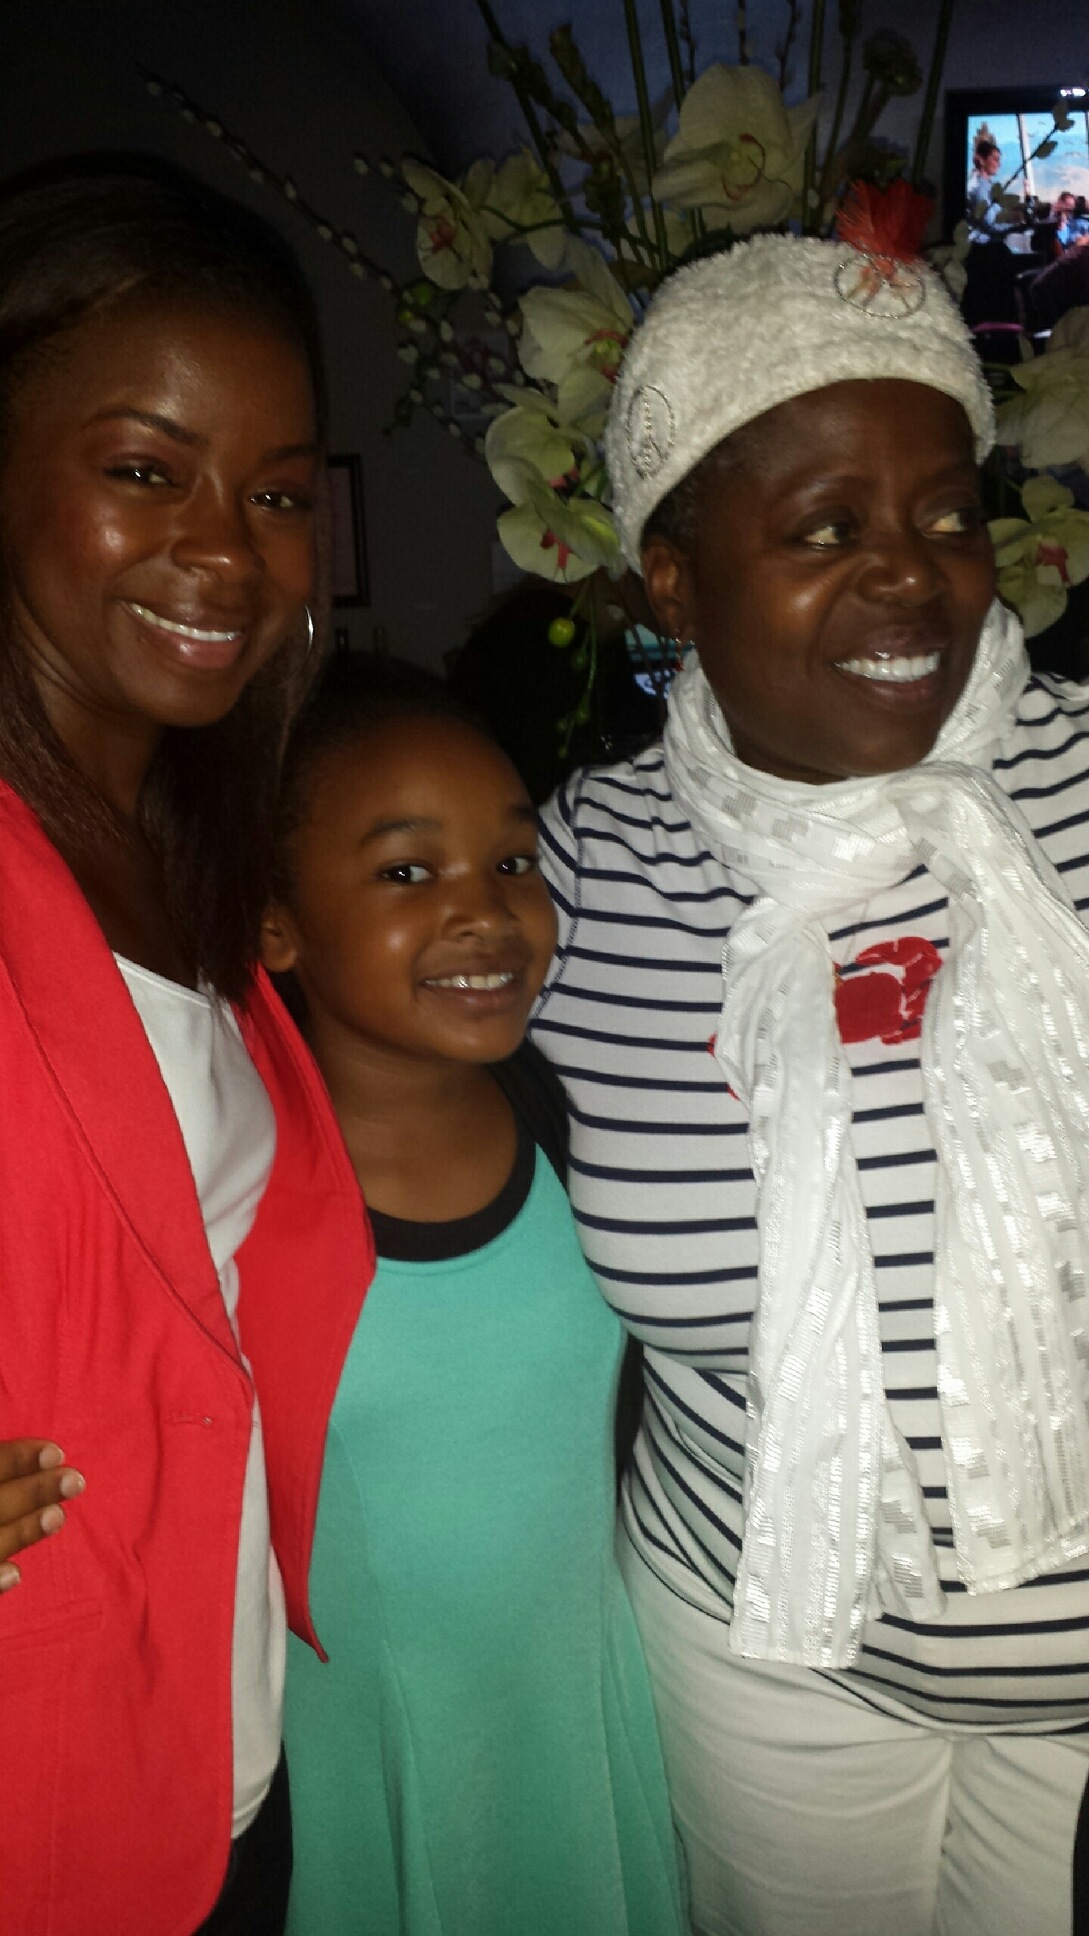 Skye Barrett with Erica Tazel and Lillias White at the Closing of 